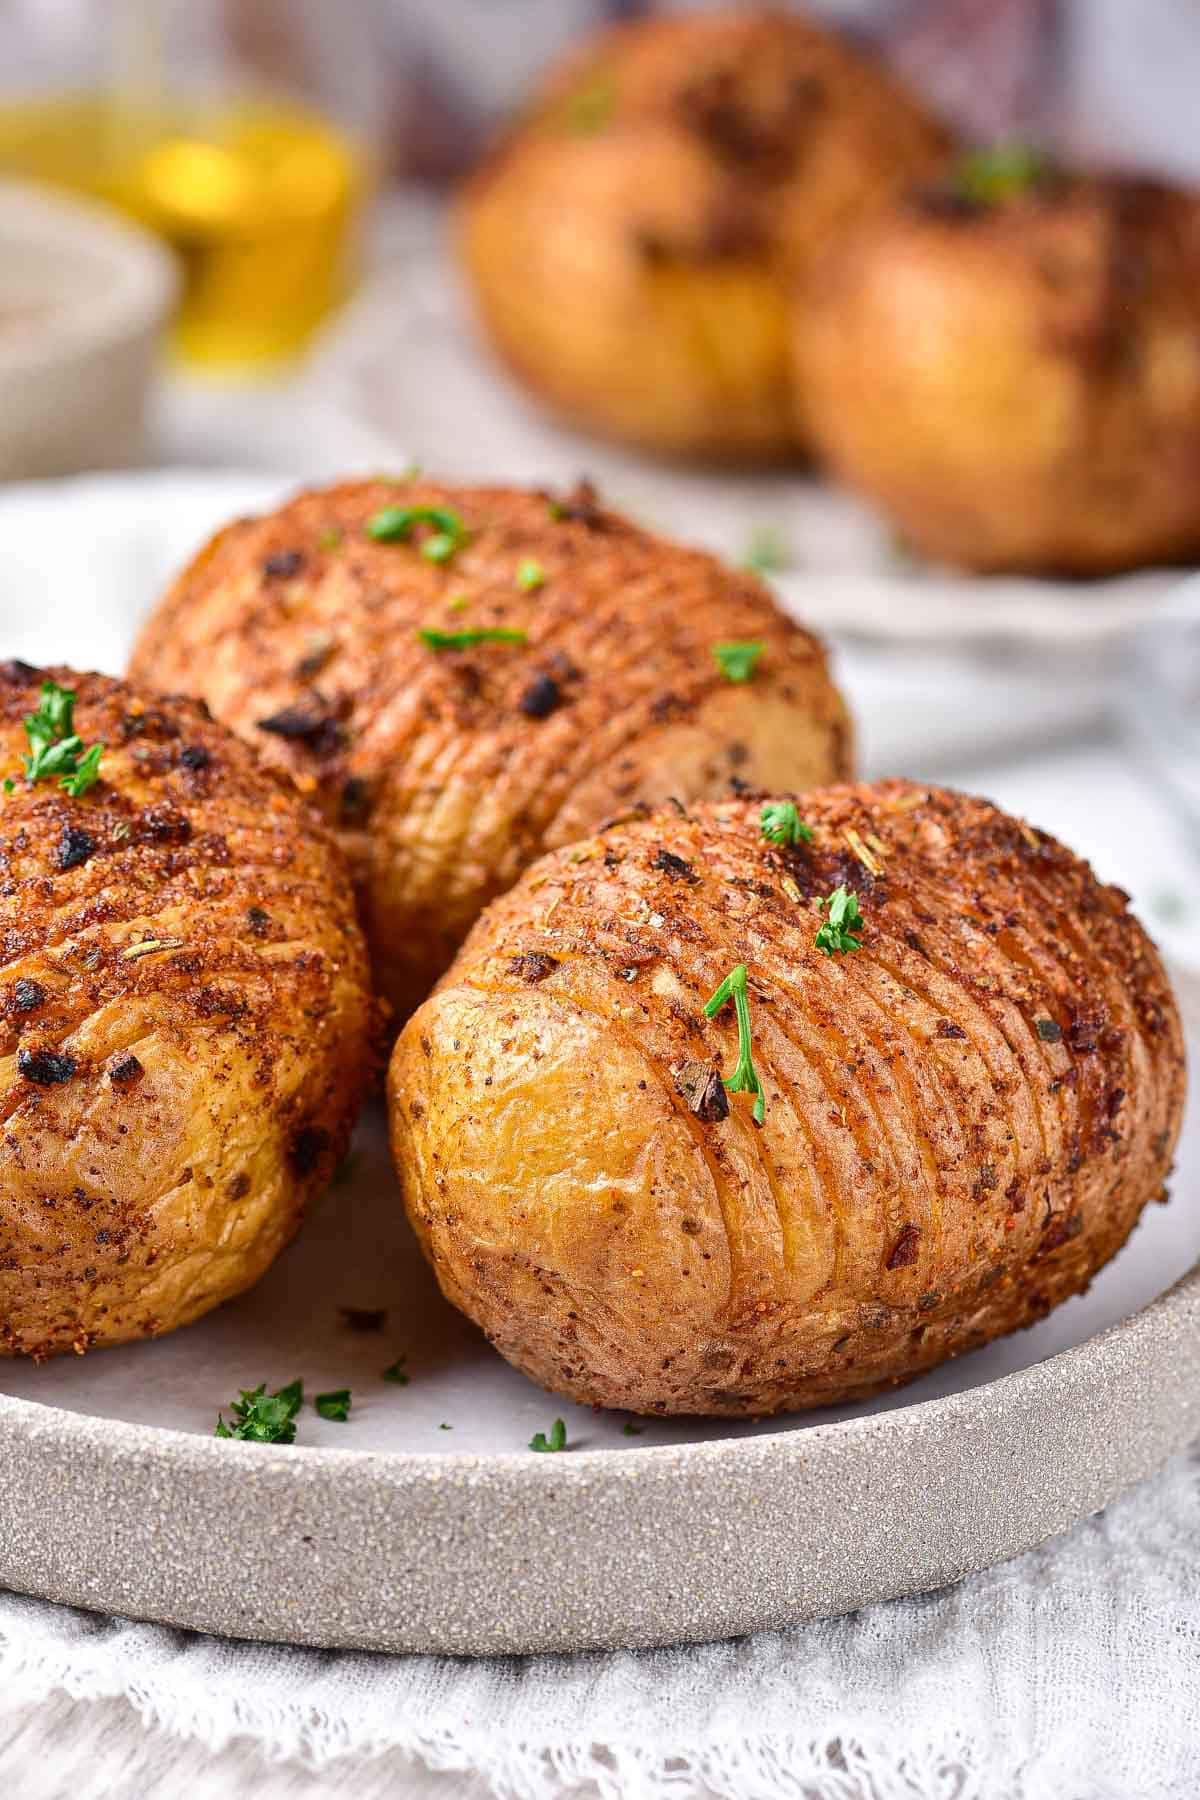 cooked hasselback potatoes with slits in them on plate with green parsley on top.